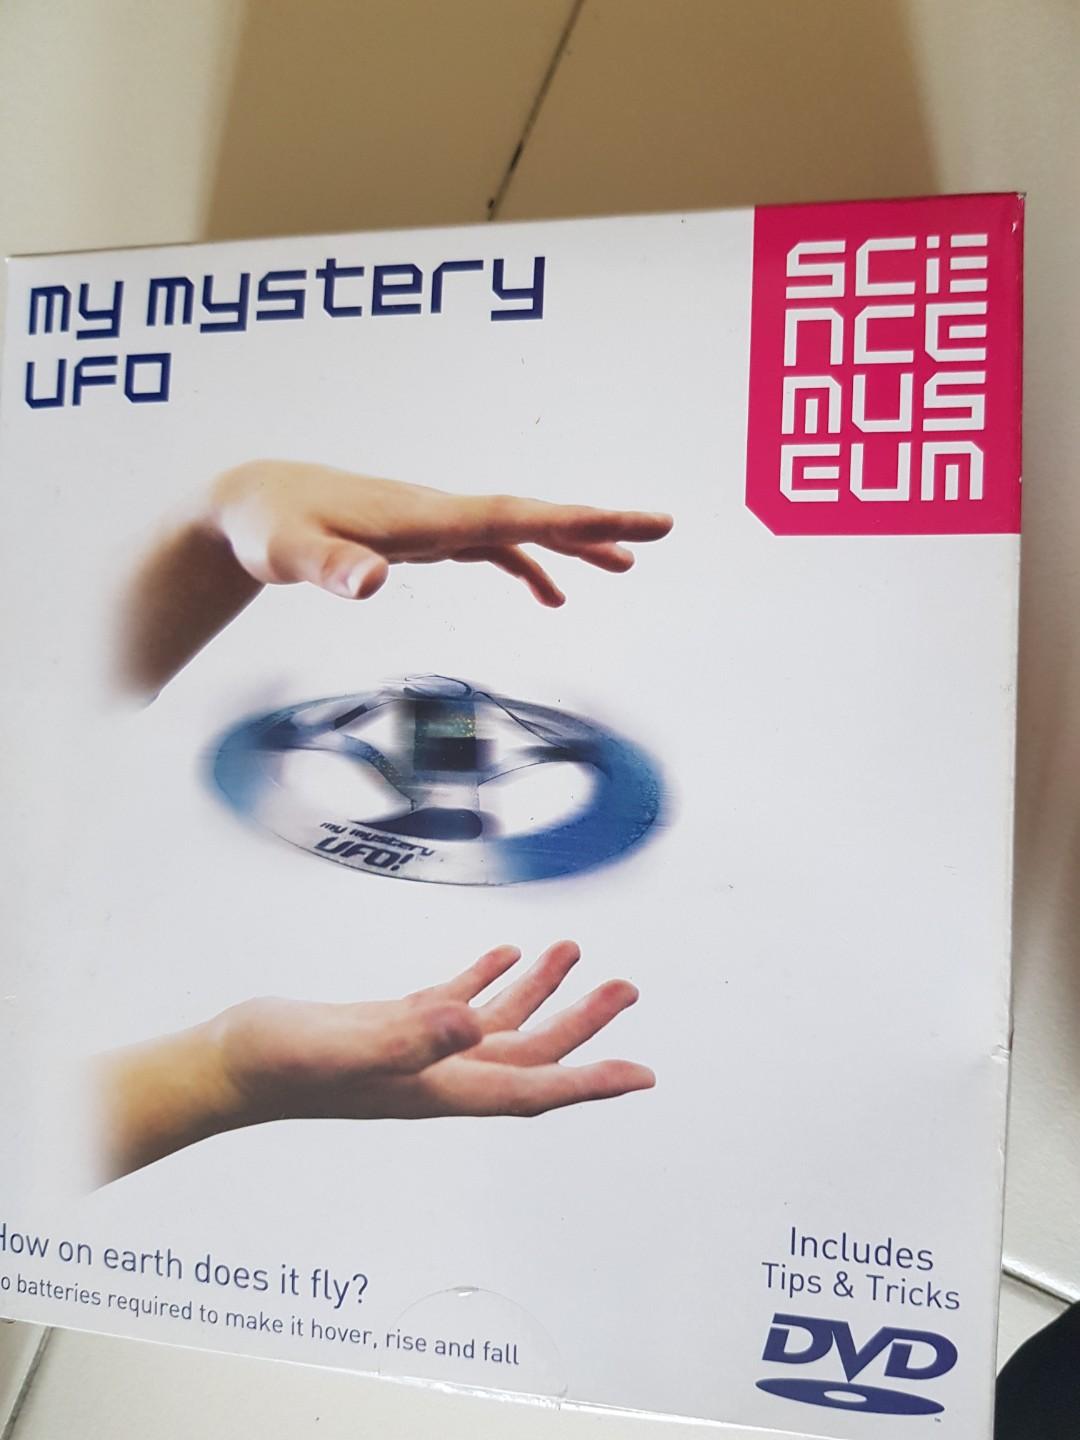 science museum ufo toy